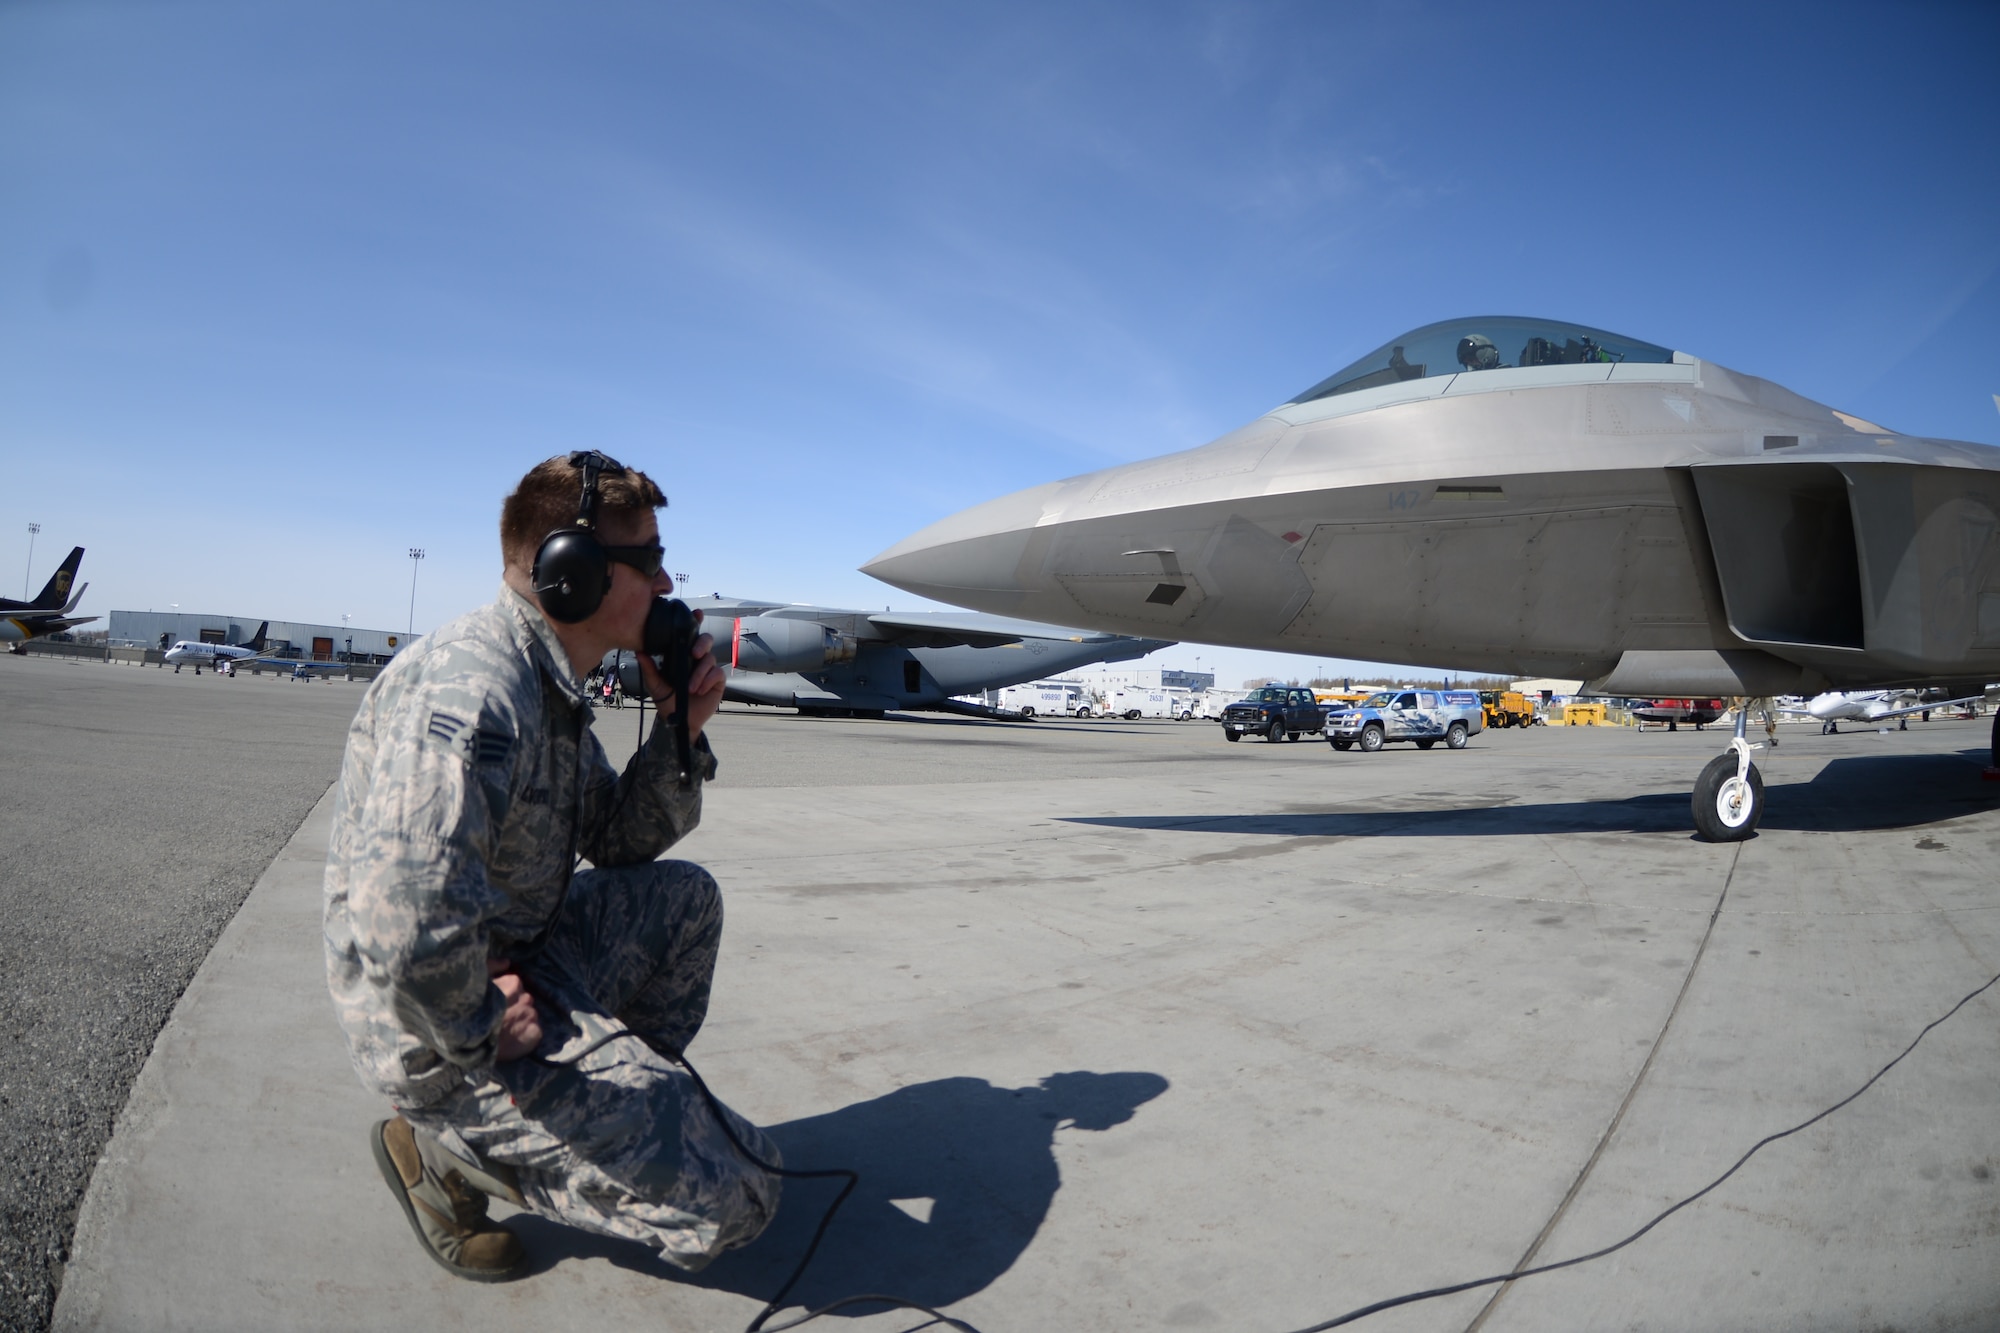 Senior Airman Anton Rozodovskiy, 477th Aircraft Maintenance Squadron F-22 crew chief, communicates with Maj. Caleb Haley, F-22 pilot assigned to the 302nd Fighter Squadron, during the aircraft launch inspection at the Great Alaska Aviation Gathering on Sunday May 3. The Air Force Reserve's 477th Fighter Group took the jet to be a part of the show that included more than 275 vendors and was attended by more than 23,000 visitors. (Air Force Photo/Tech. Sgt. Dana Rosso)